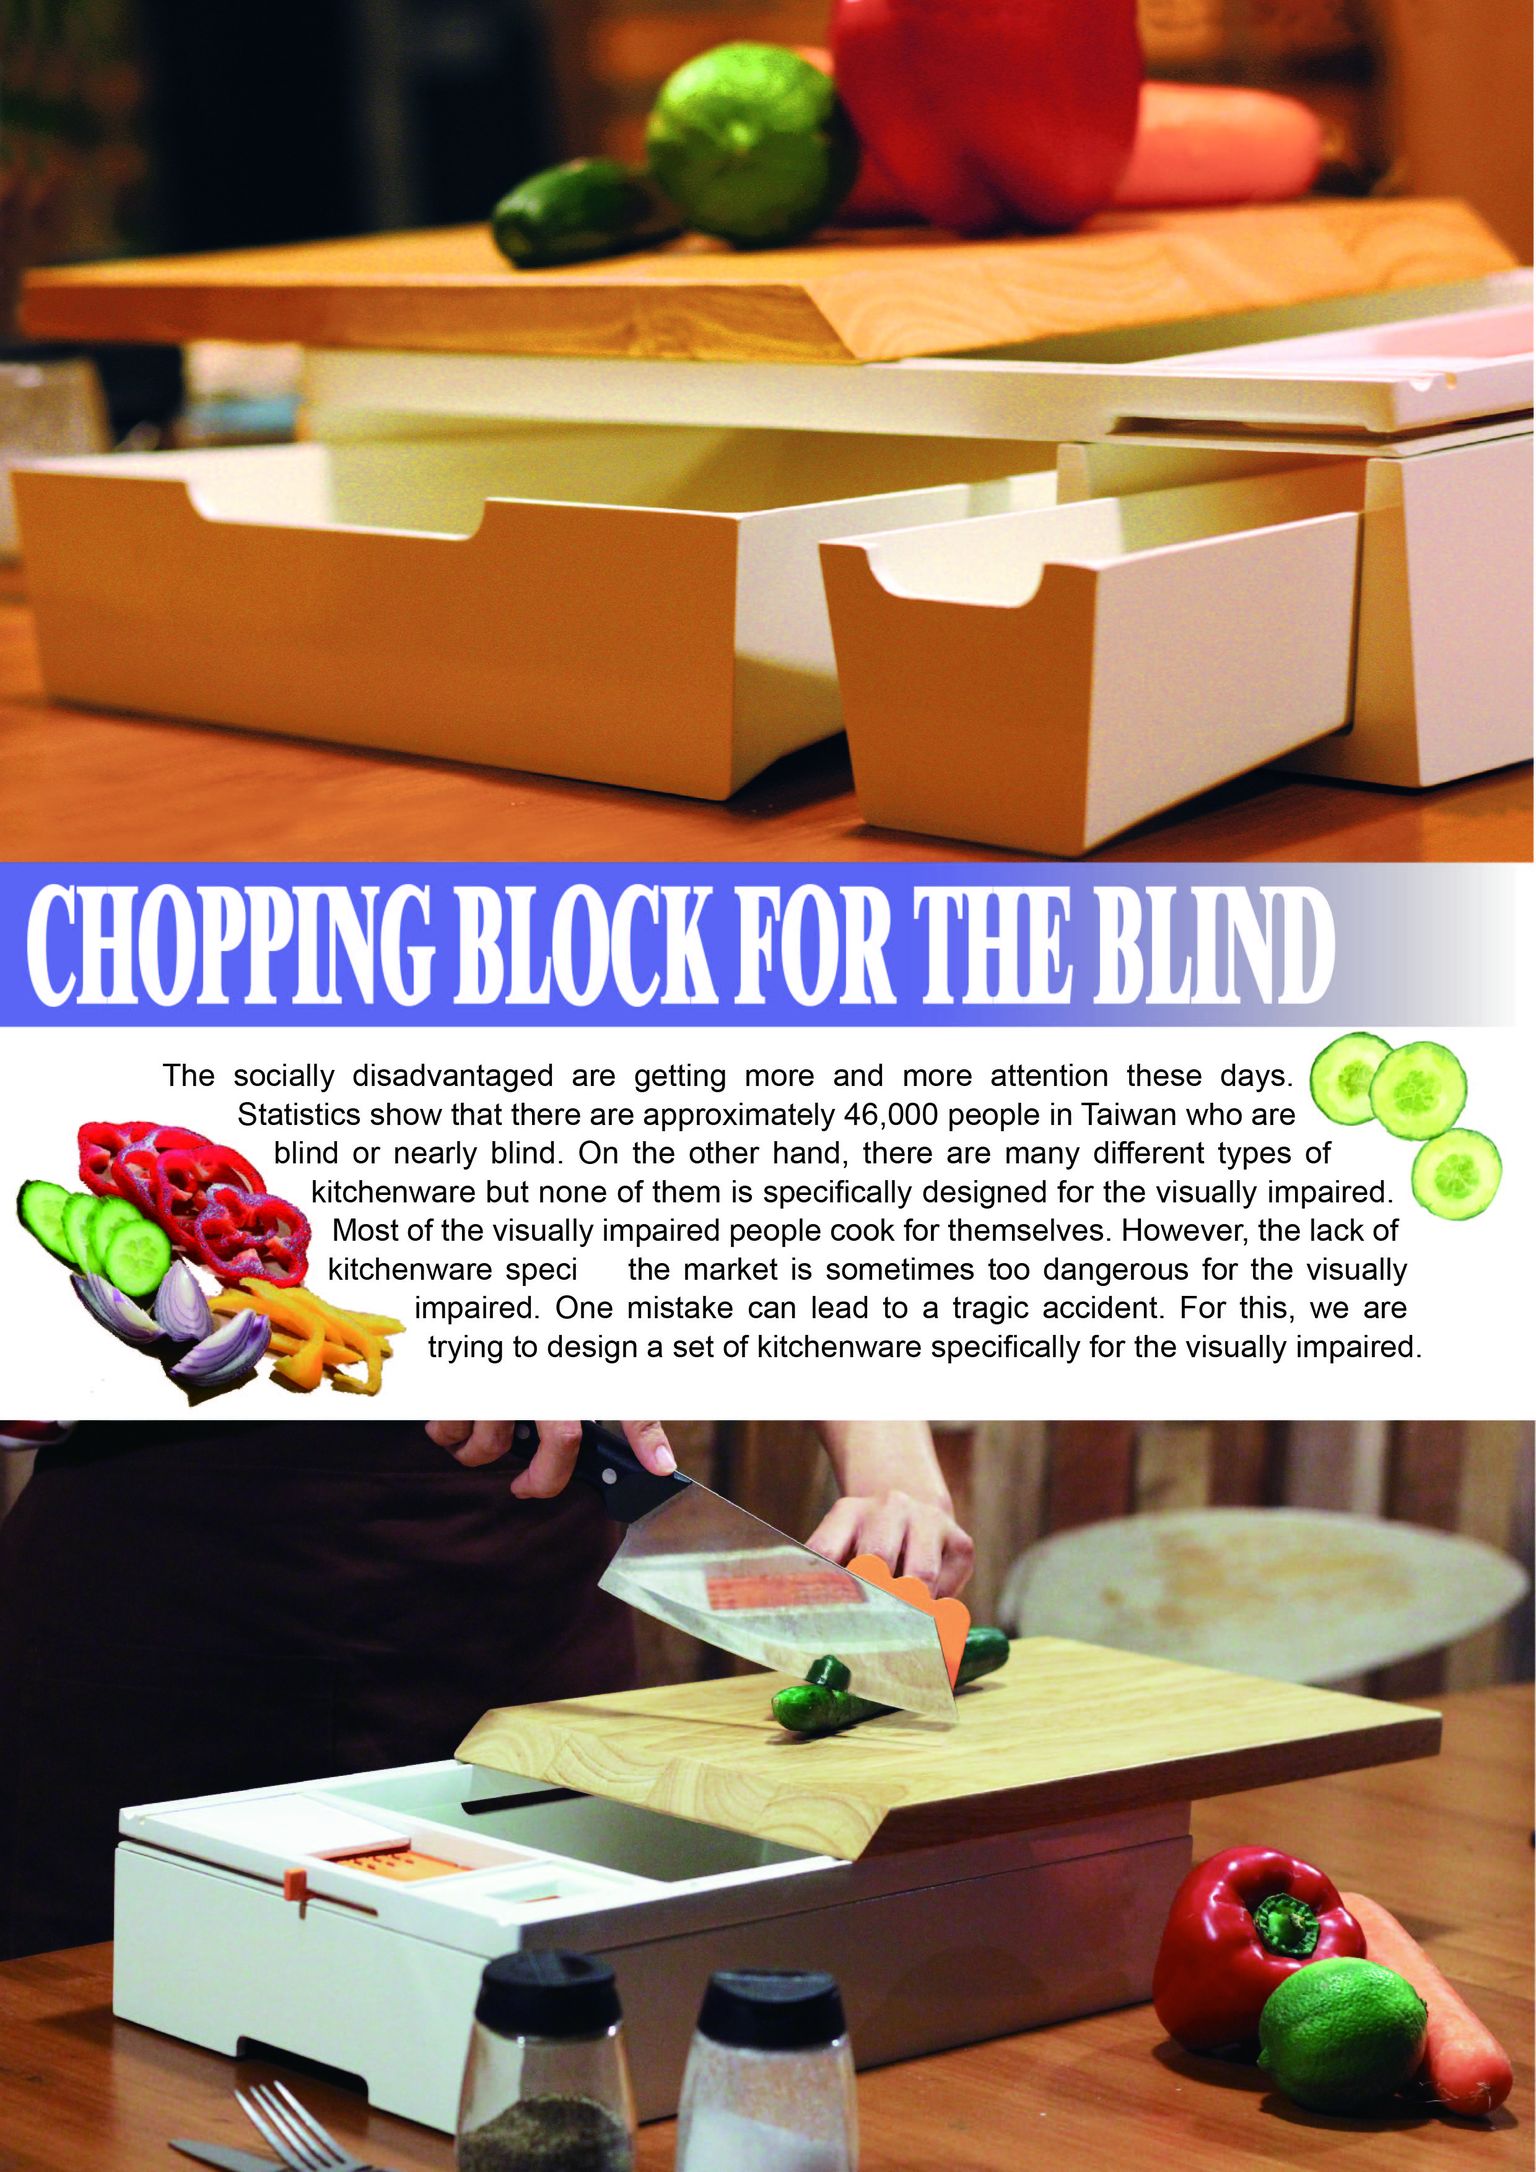 Chopping for the blind